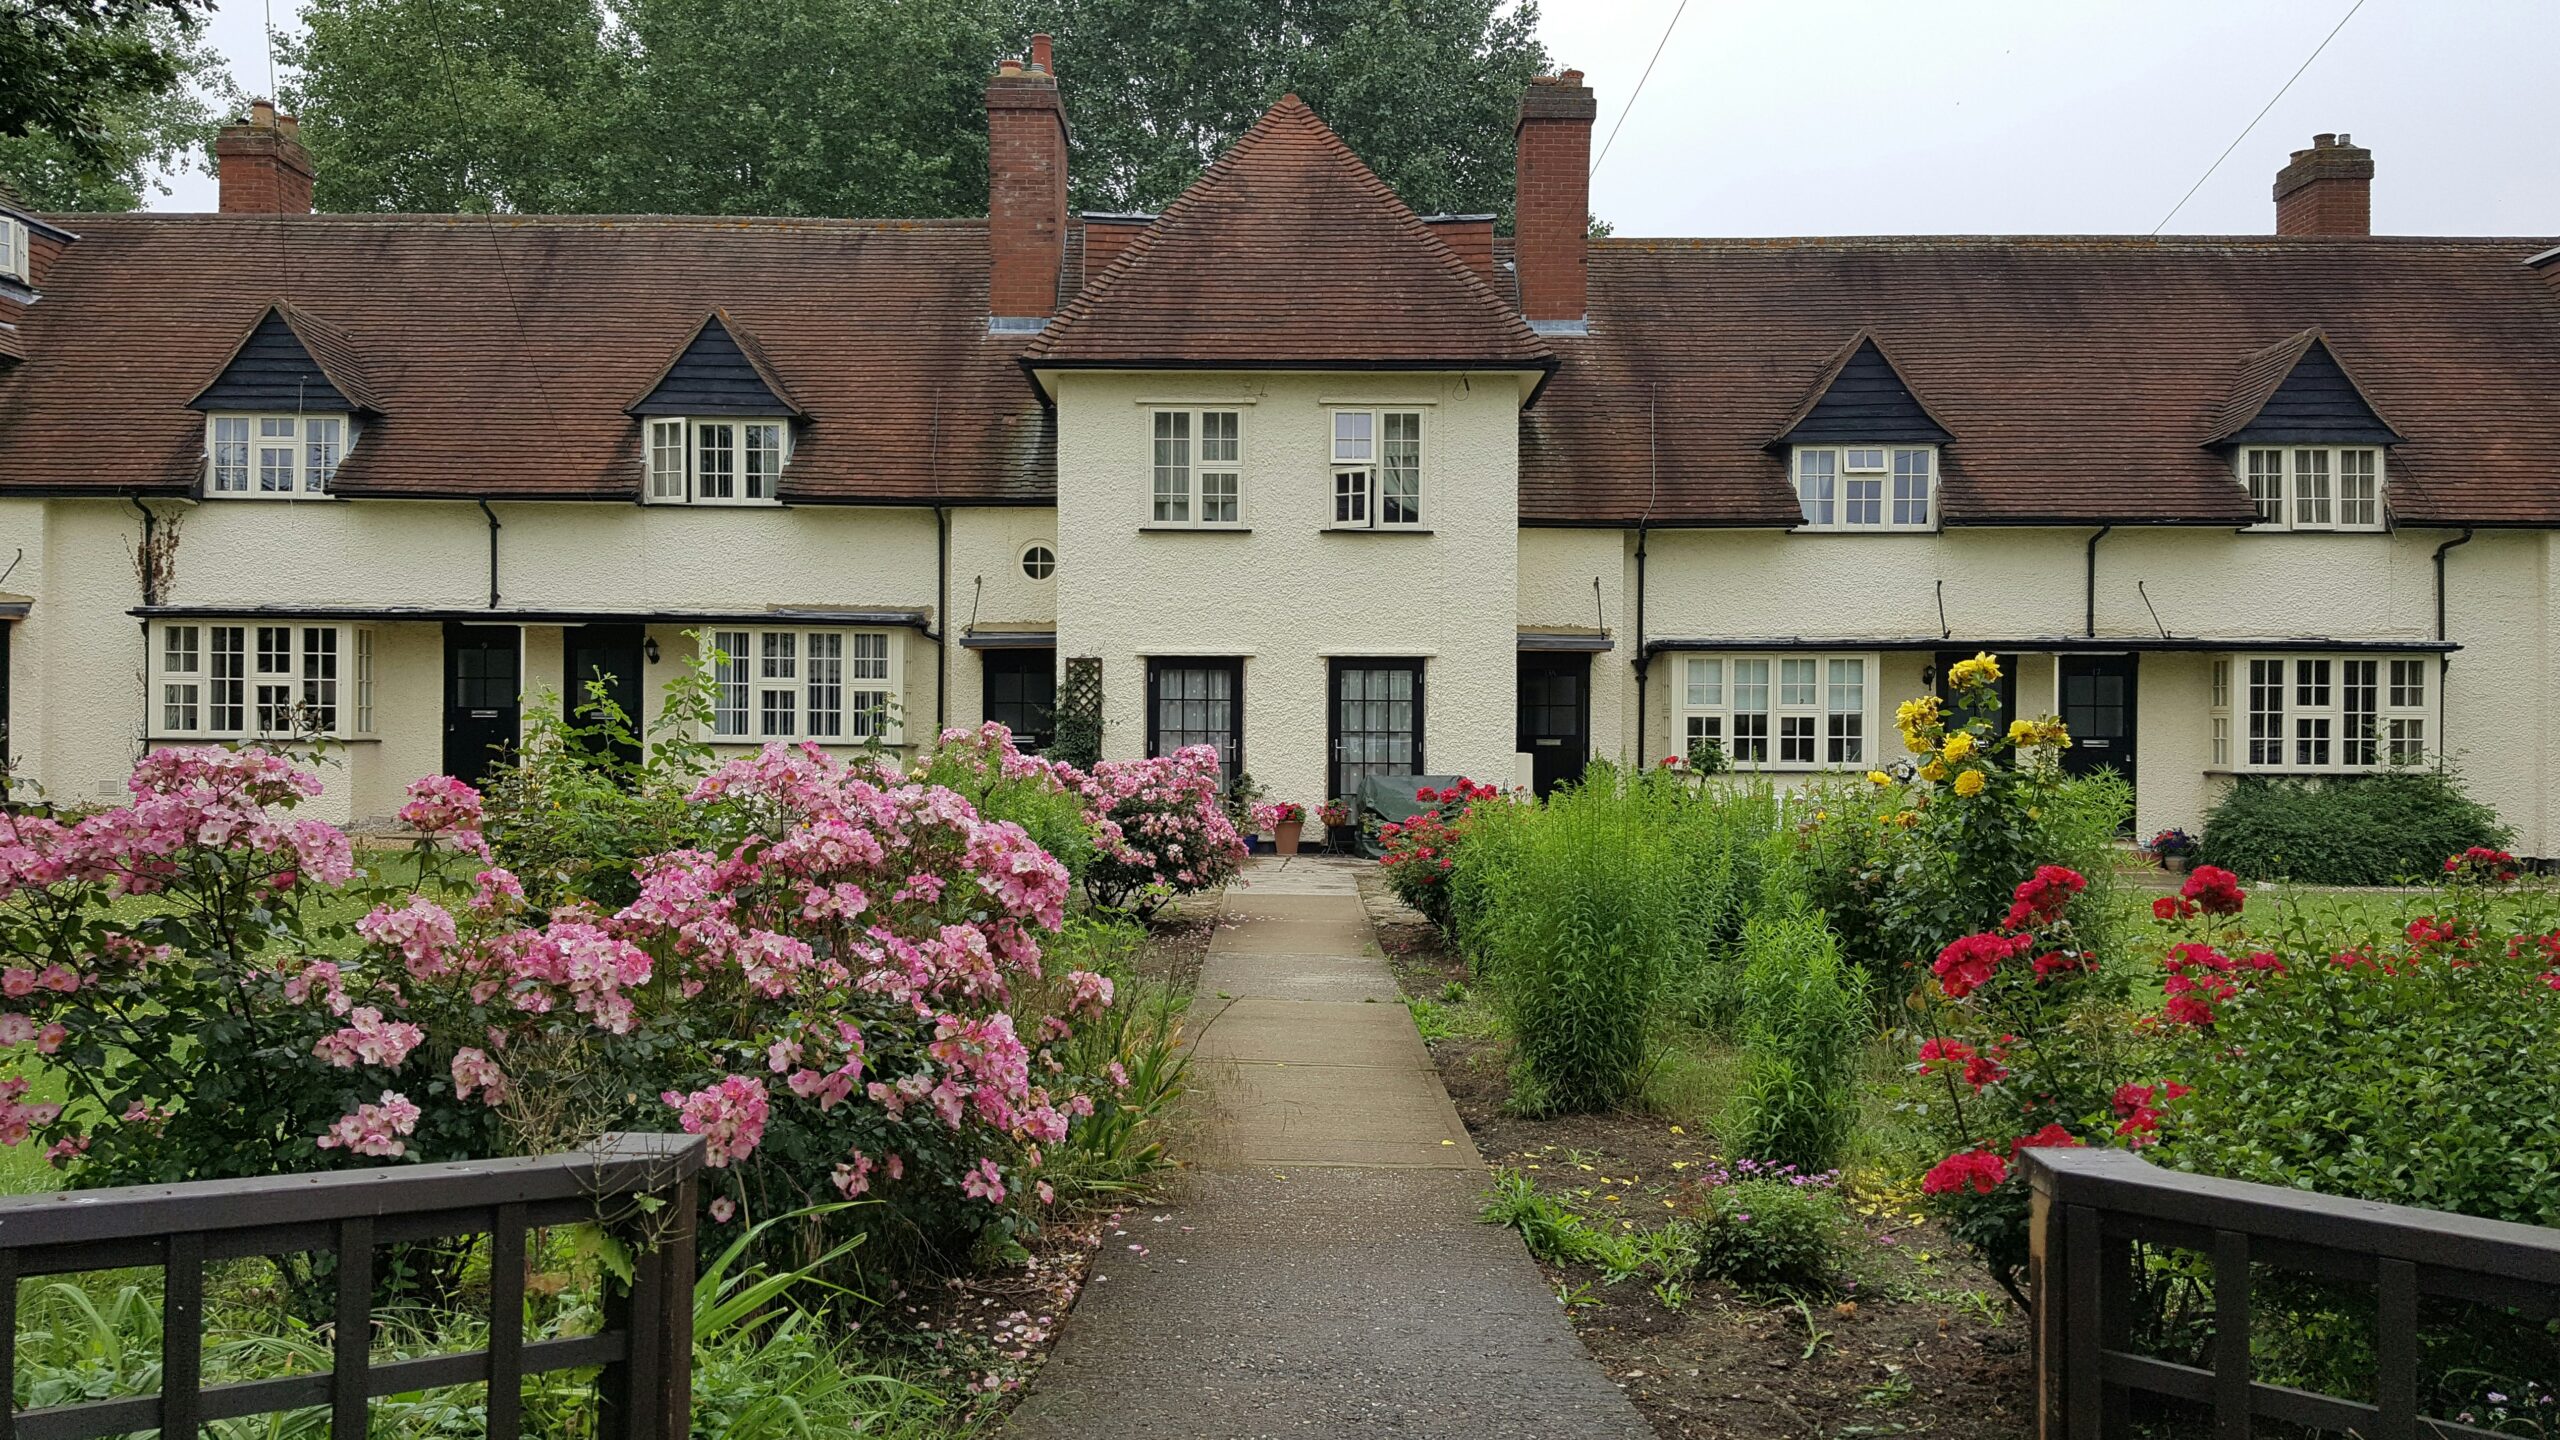 Hertfordshire is a more rural area of England which was featured in the Netflix series "The Gentlemen".
pictured: a English cottage and garden on a bright day